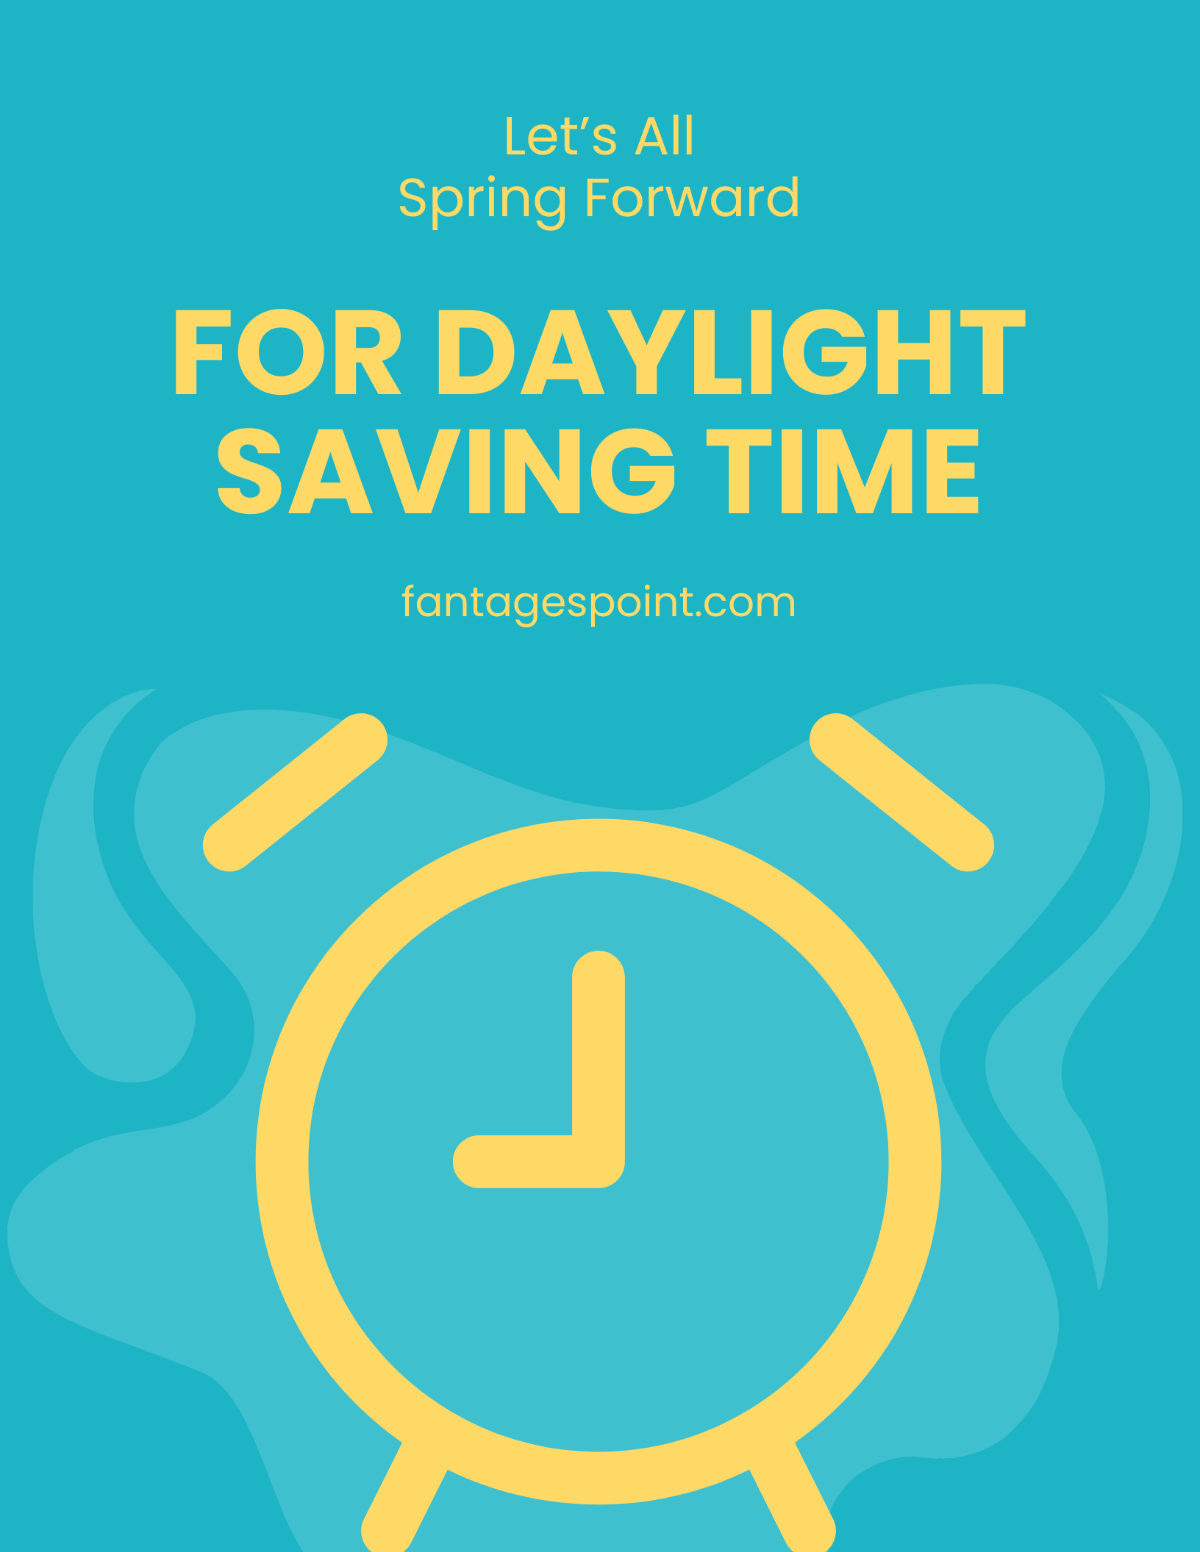 Free Spring Forward Daylight Saving Flyer Template in Word, Google Docs, PSD, Apple Pages, Publisher